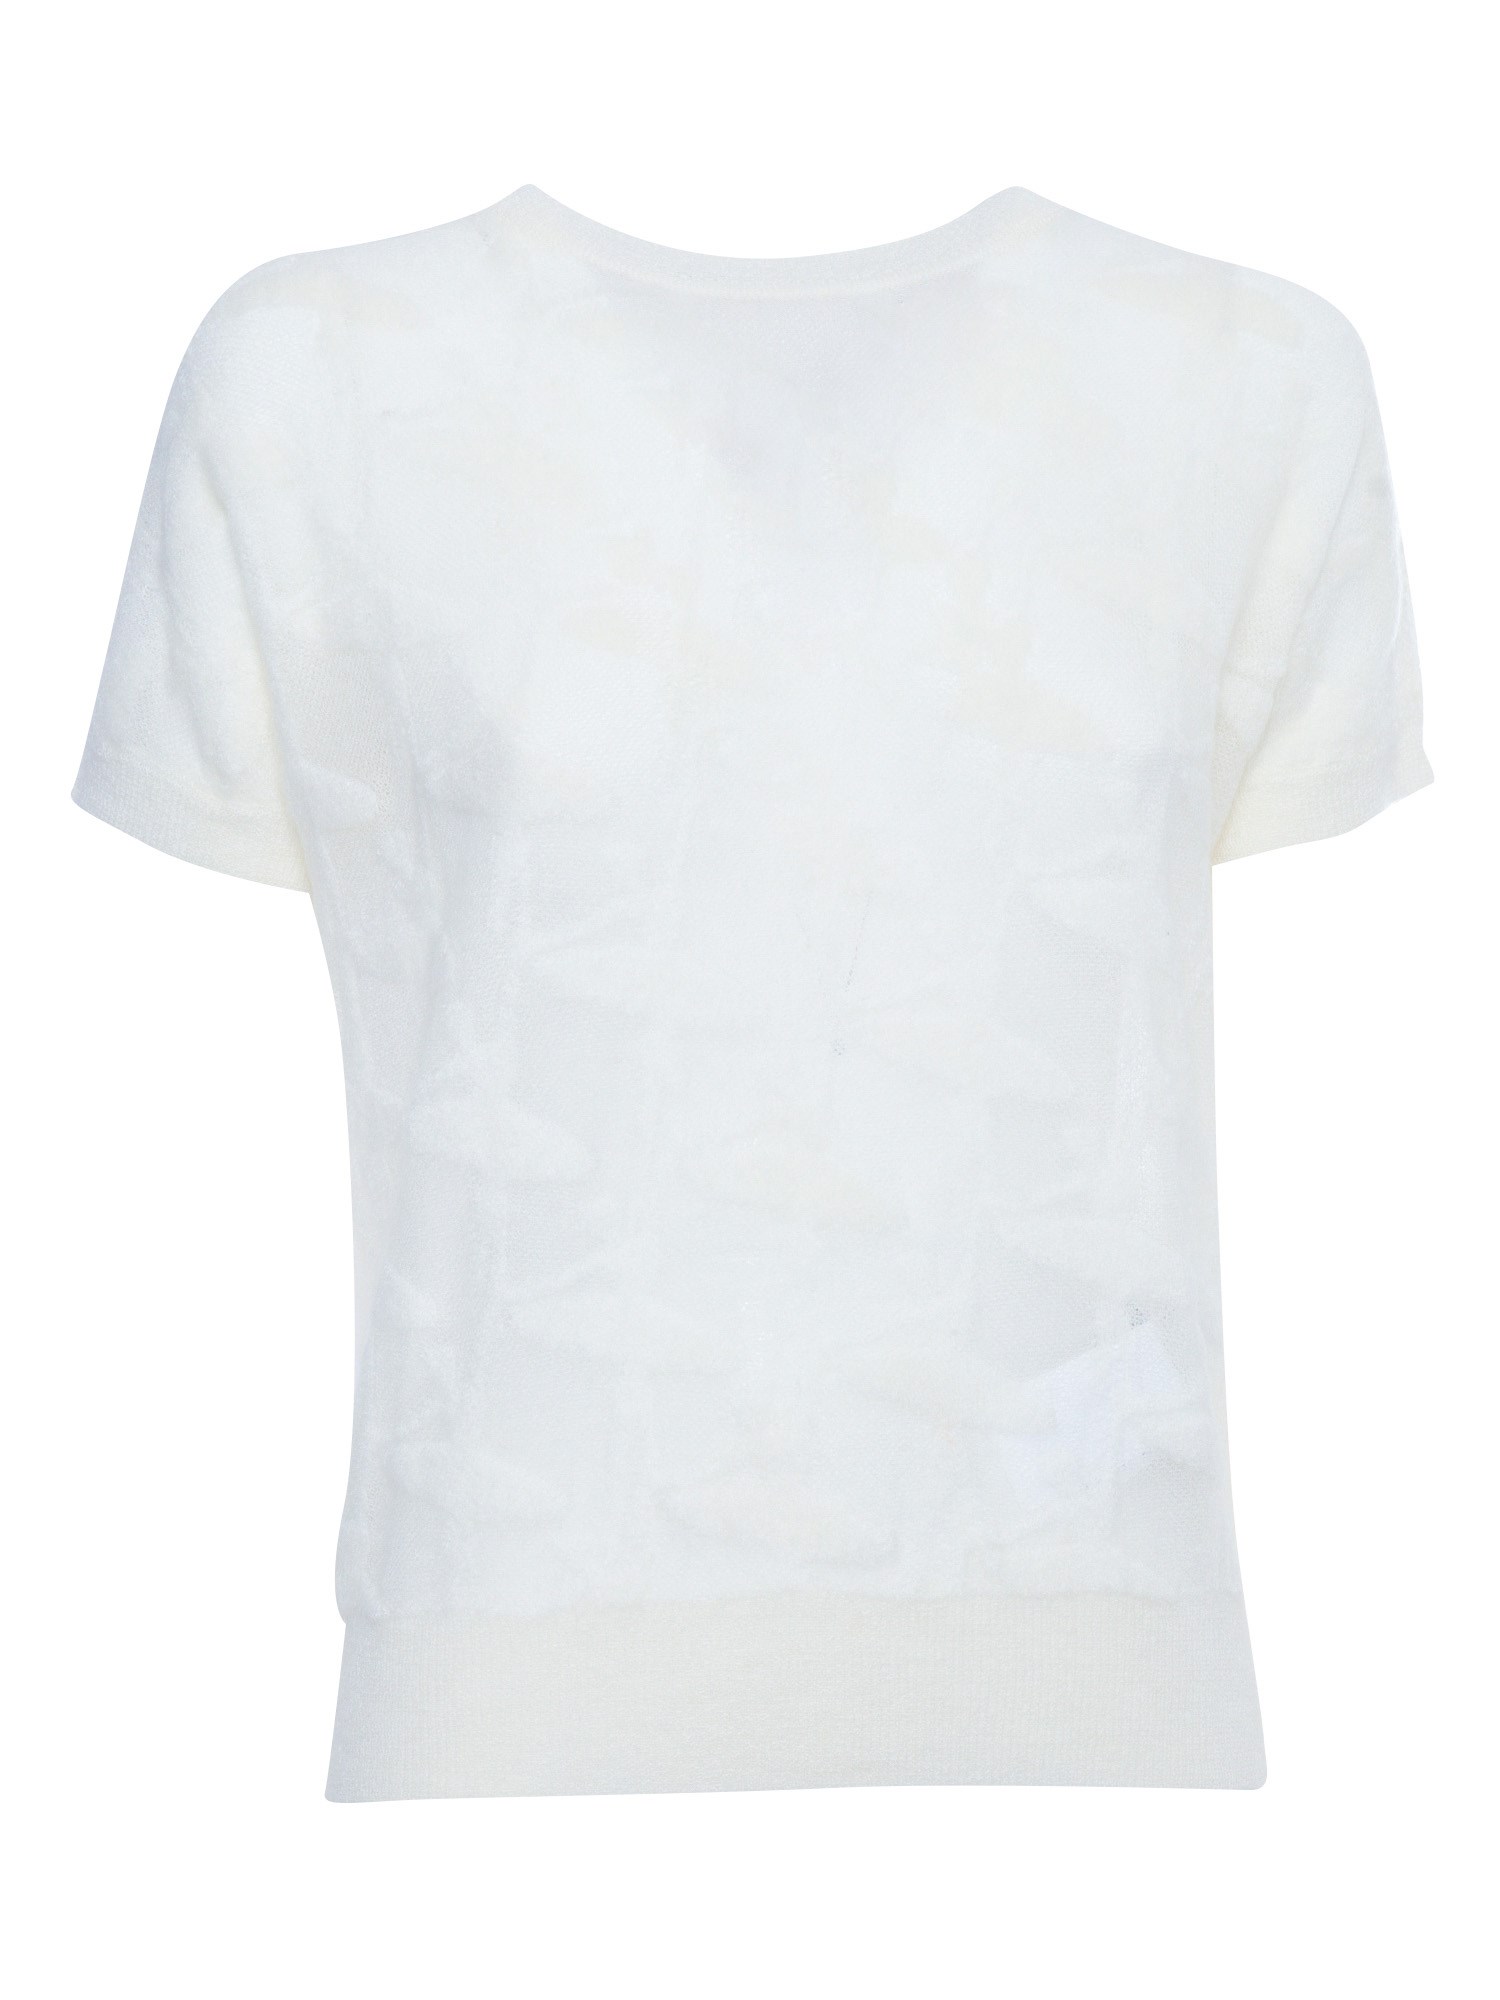 Max Mara Kniteted Sleevless T-shirt In White